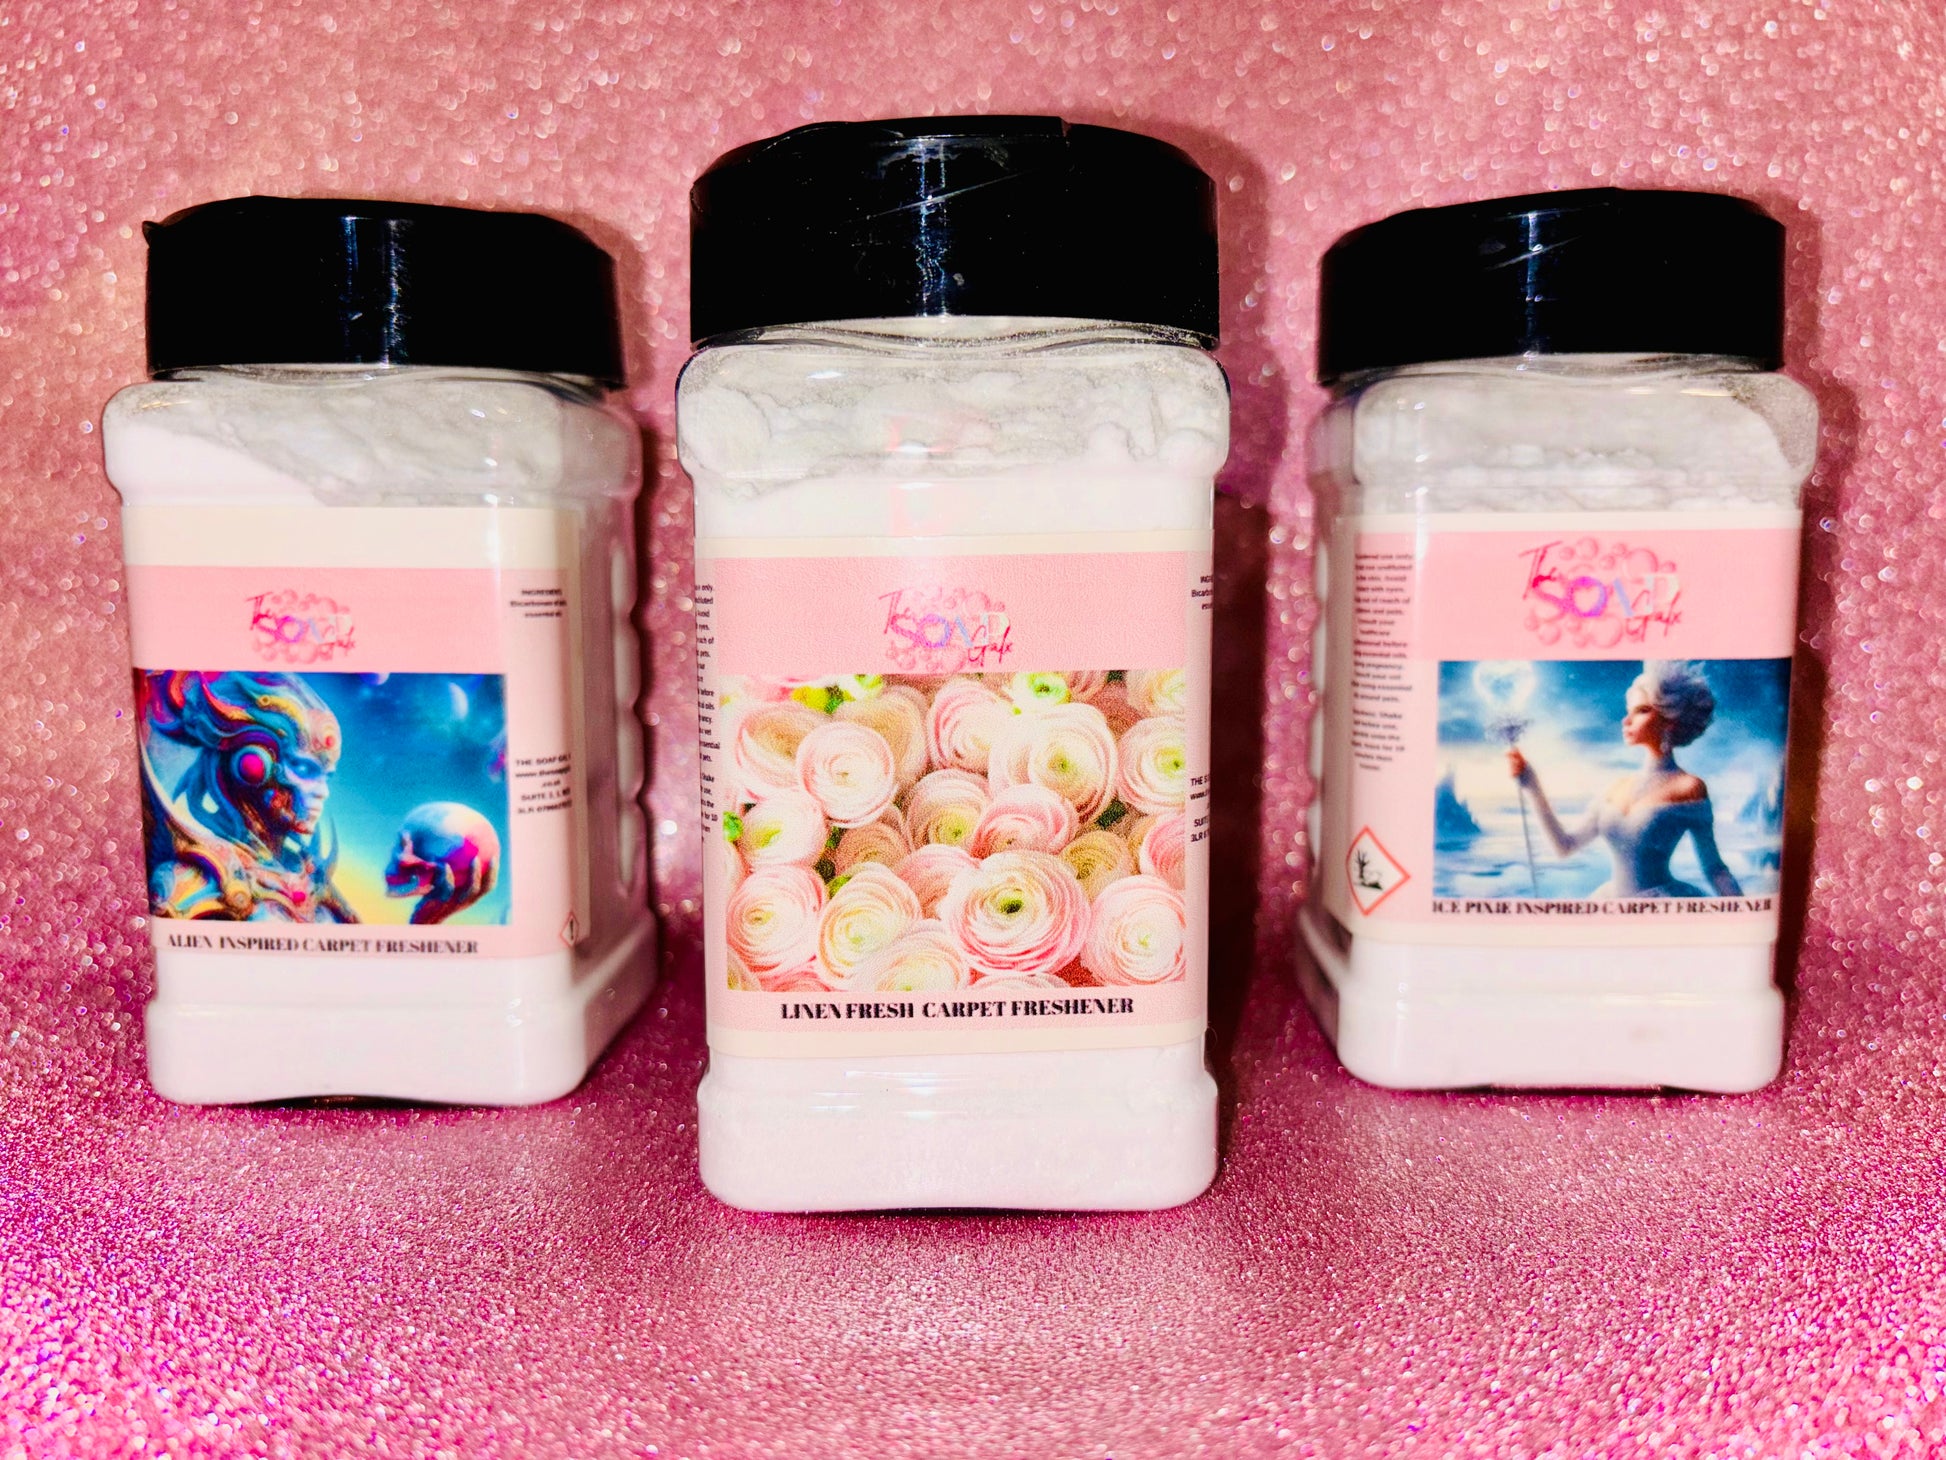 Three jars of The Soap Gals Scent and Vac Laundry & Perfume Fragrance Carpet Freshener powder on a pink background.